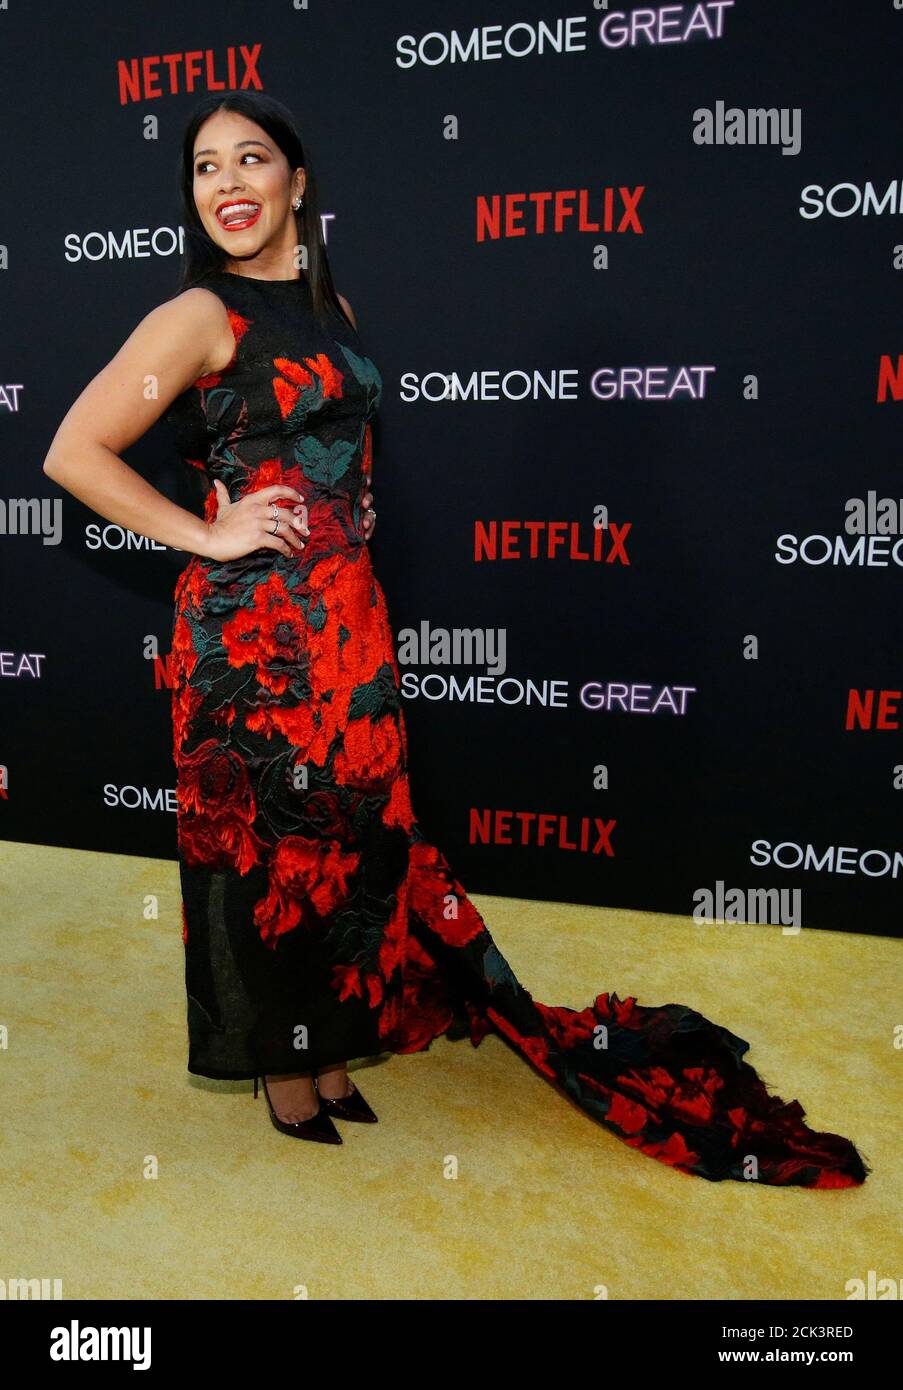 Cast member Gina Rodriguez poses at a screening for the film “Someone Great” in Los Angeles, California, U.S., April 17, 2019. REUTERS/Mario Anzuoni Stock Photo